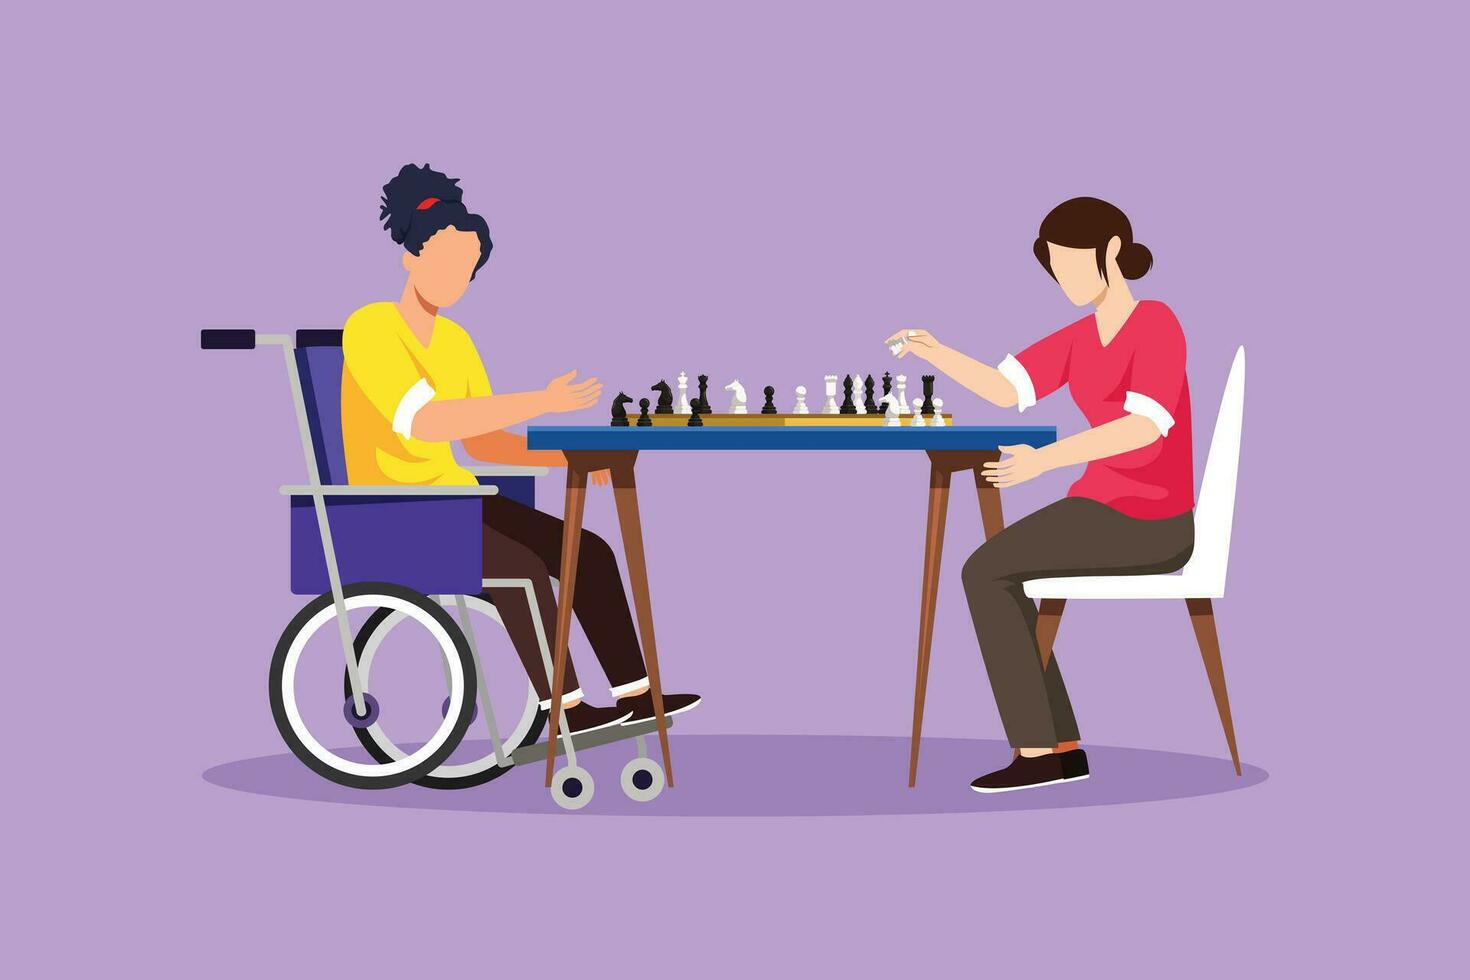 Cartoon flat style drawing disabled woman in wheelchair plays chess with friend. People on social adaptation, hobby, tolerance, inclusive, accessibility, diversity. Graphic design vector illustration